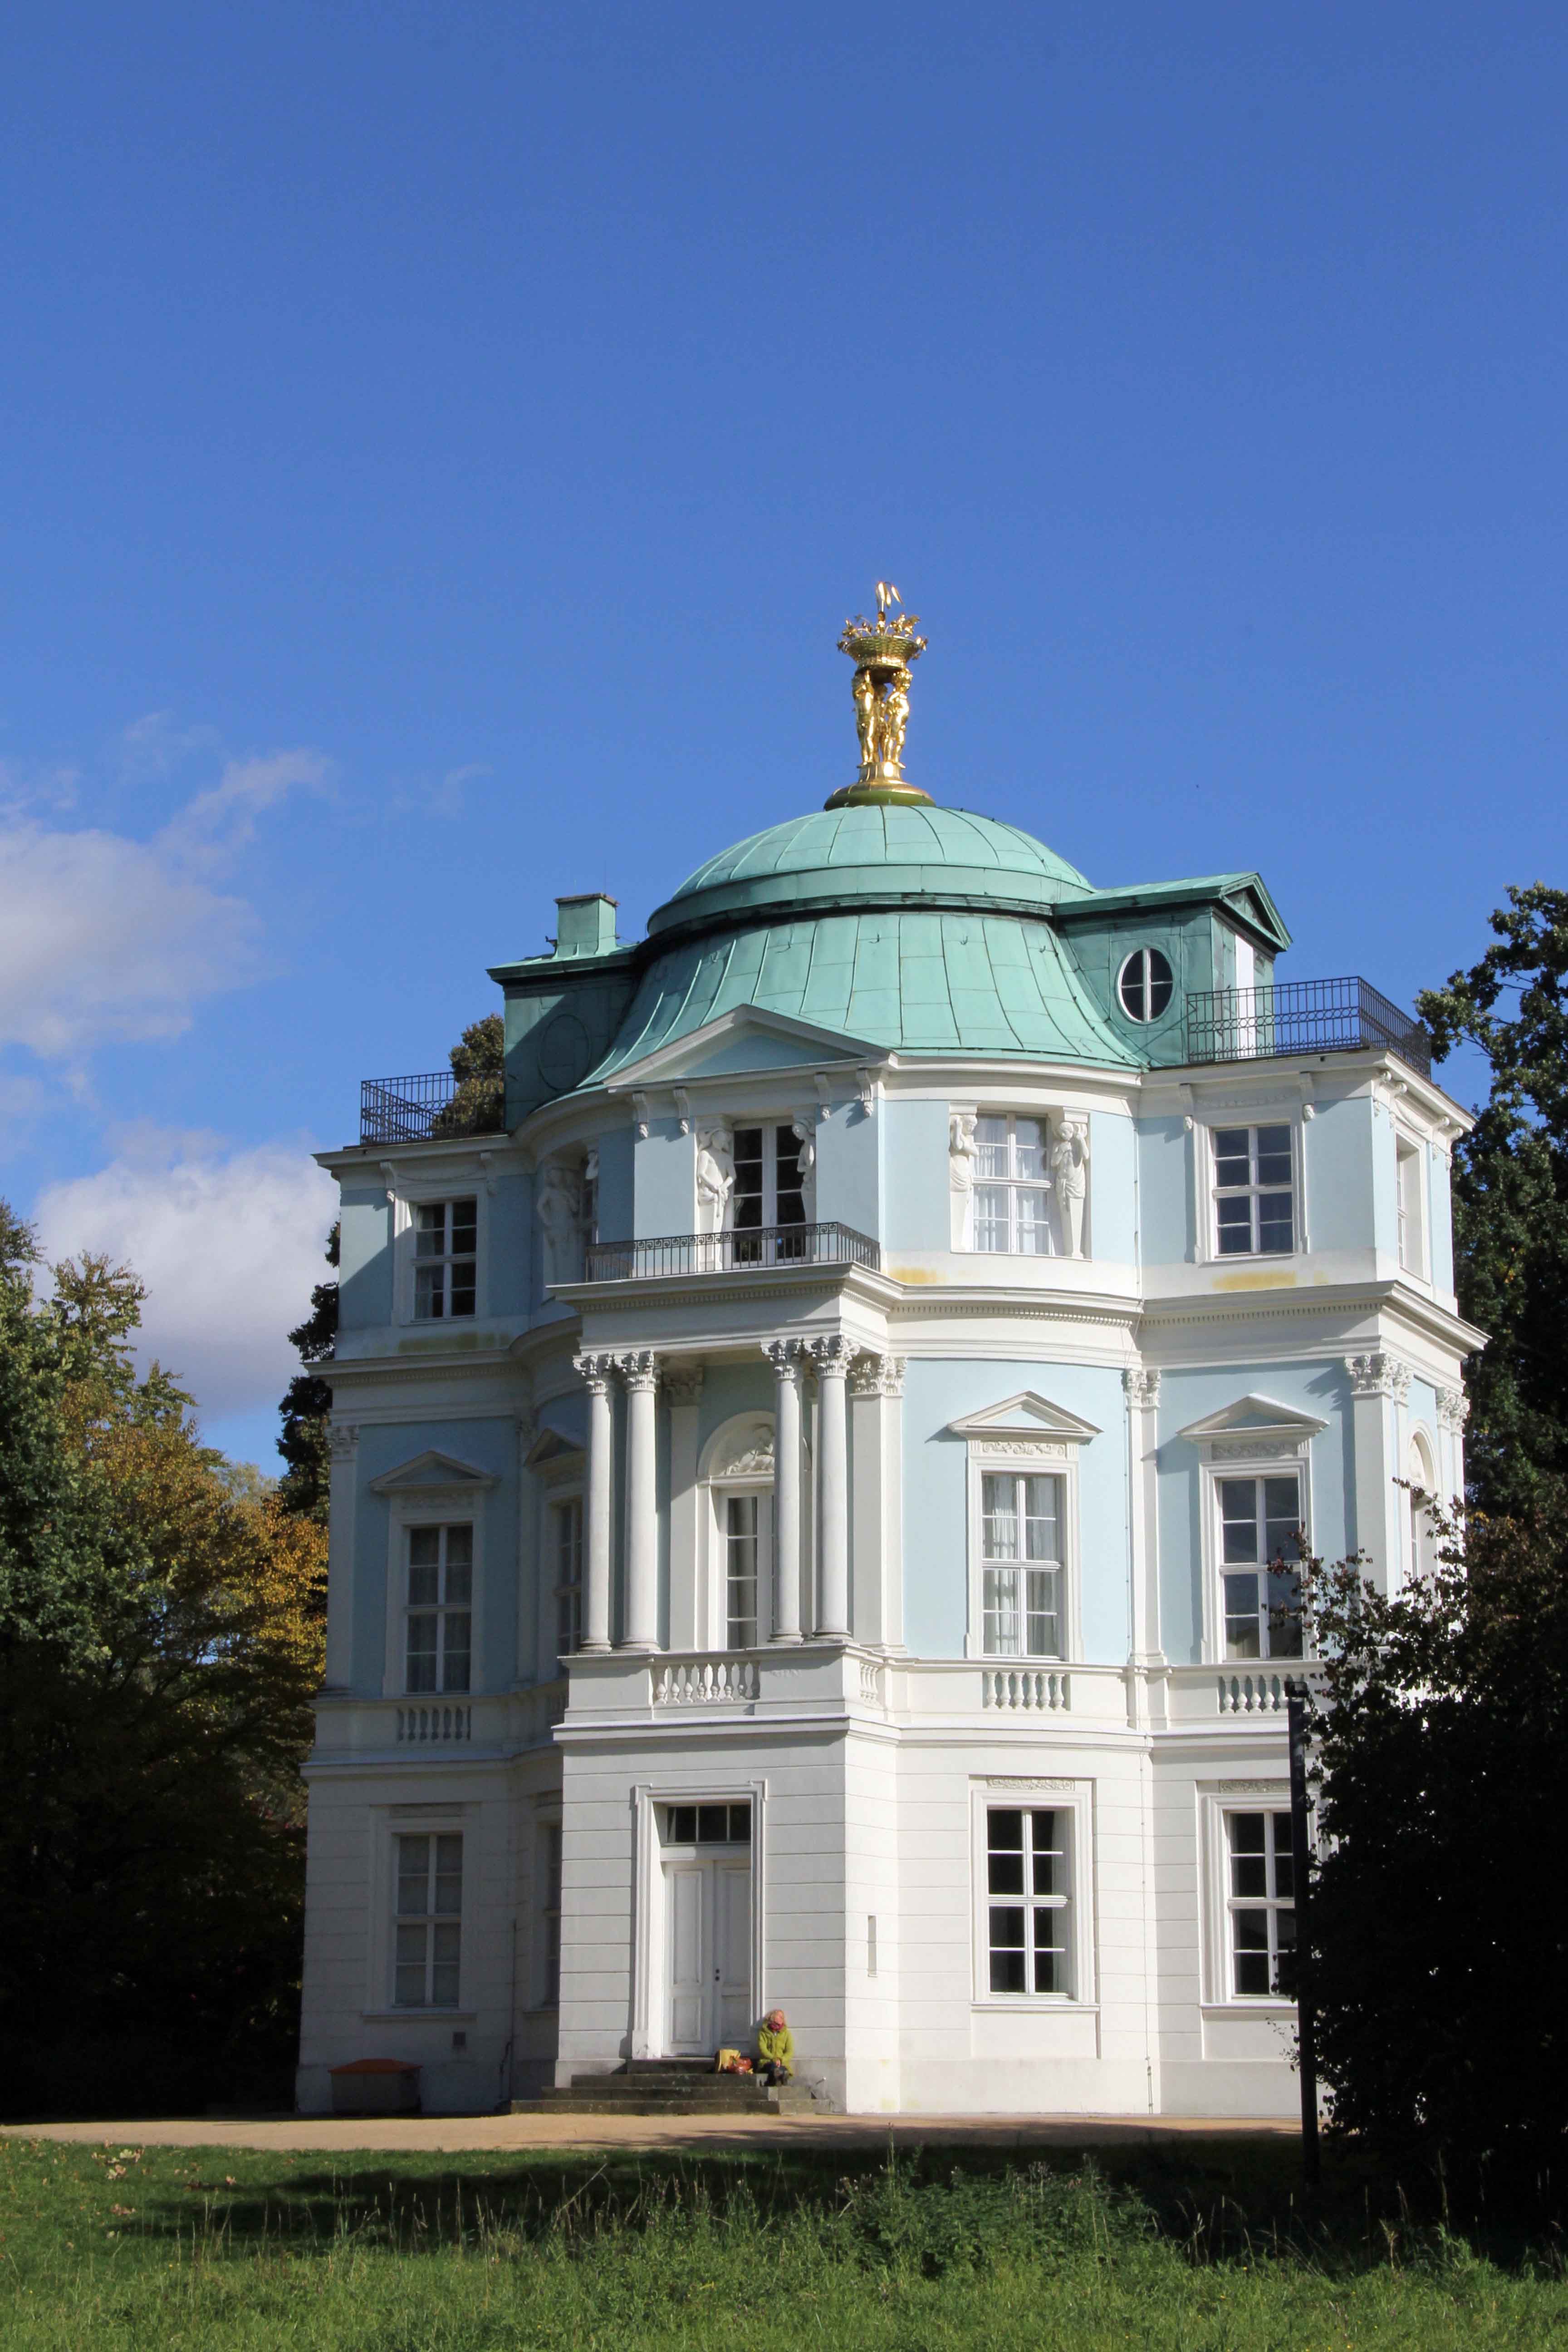 The Belvedere, which houses the Berlin Porcelain Museum, in the Palace Gardens of Schloss Charlottenburg in Berlin